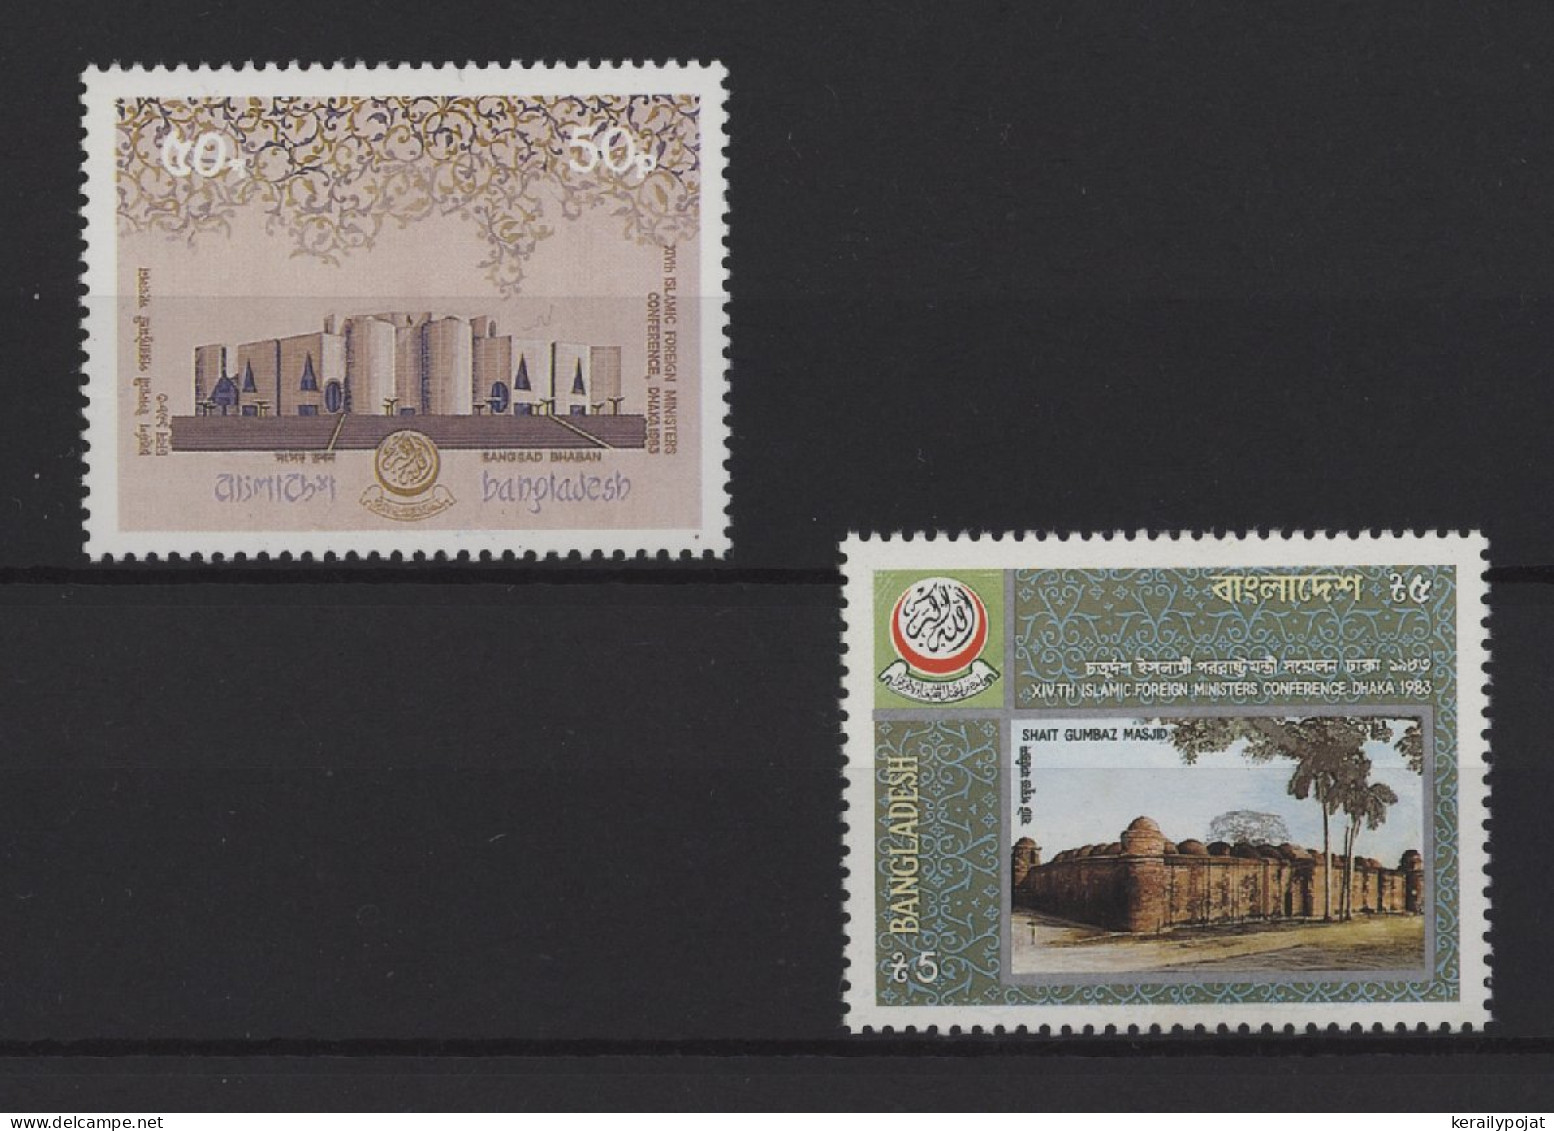 Bangladesh - 1983 Conference Of Foreign Ministers Of The Islamic States MNH__(TH-25504) - Bangladesch